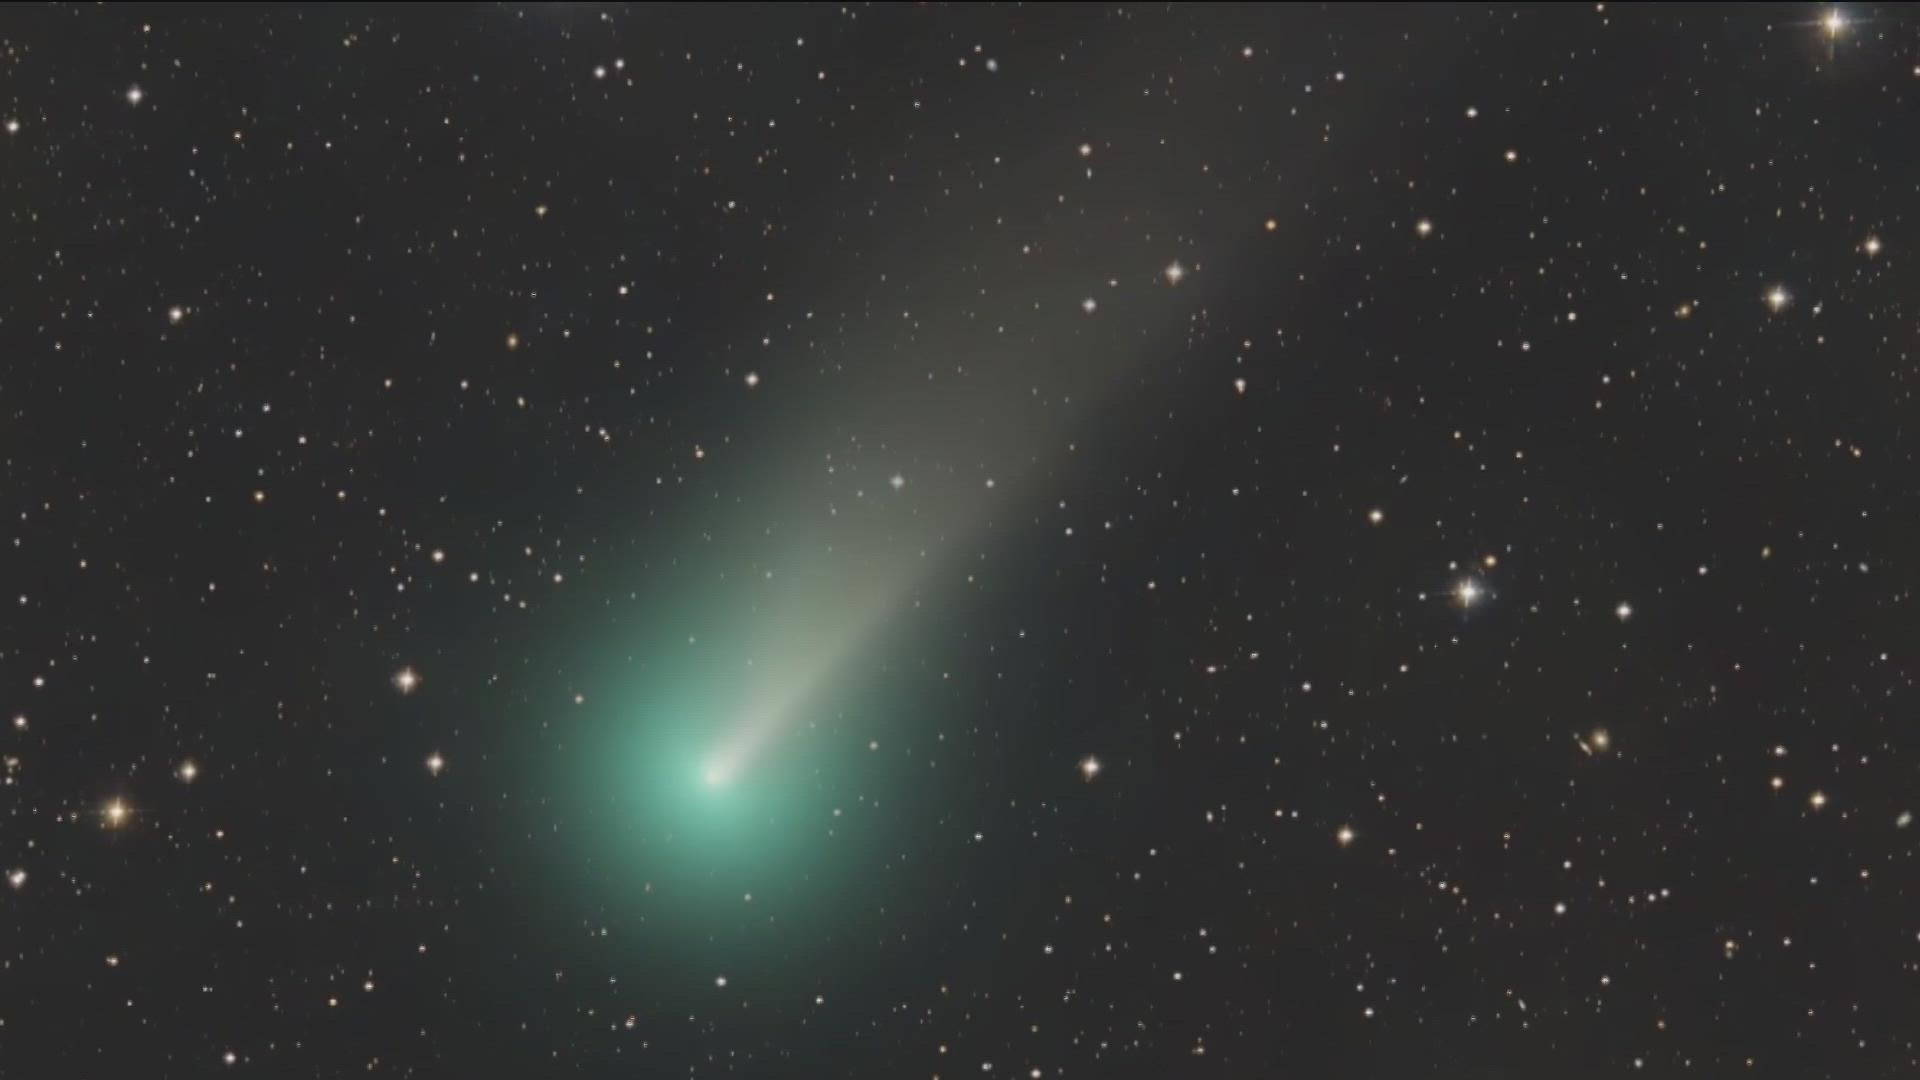 The comet was first discovered by researchers at Palomar Observatory.